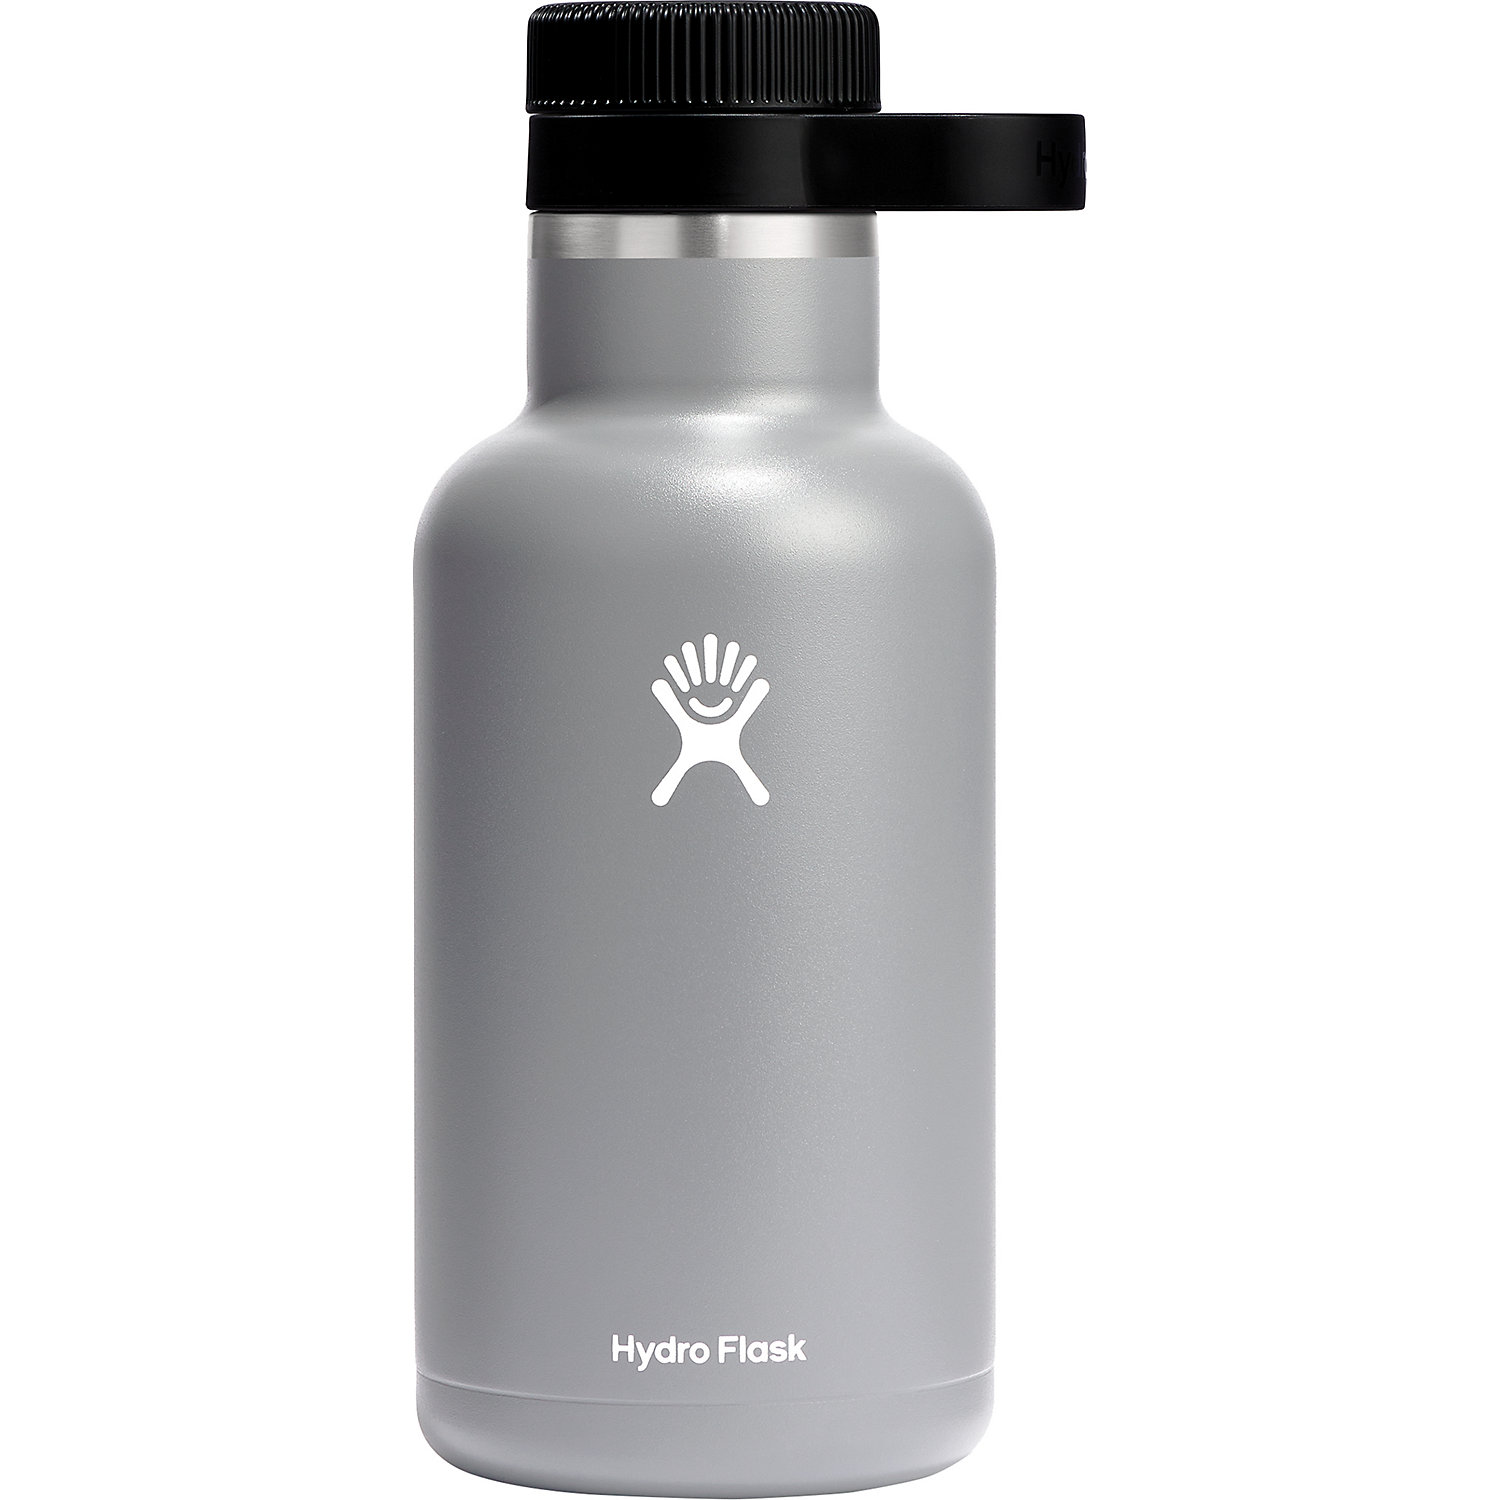 Hydro Flask 64oz Beer Growler Insulated Flask